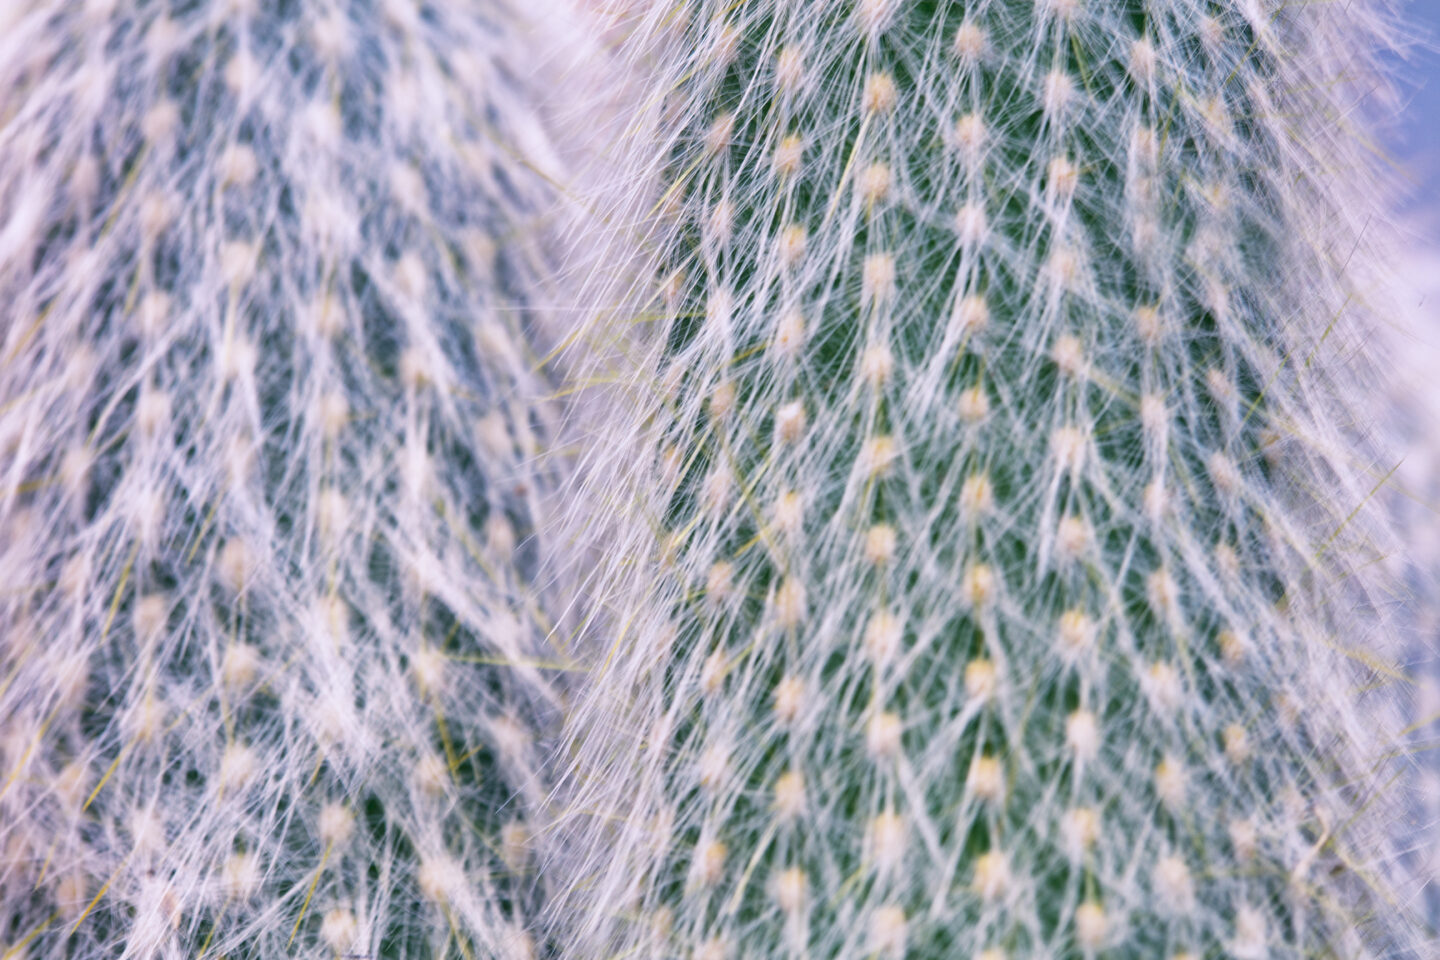 Photo of a cactus plant with a lot of fuzz, taken by Carol Schiraldi of Carol's Little World for Chase the Light